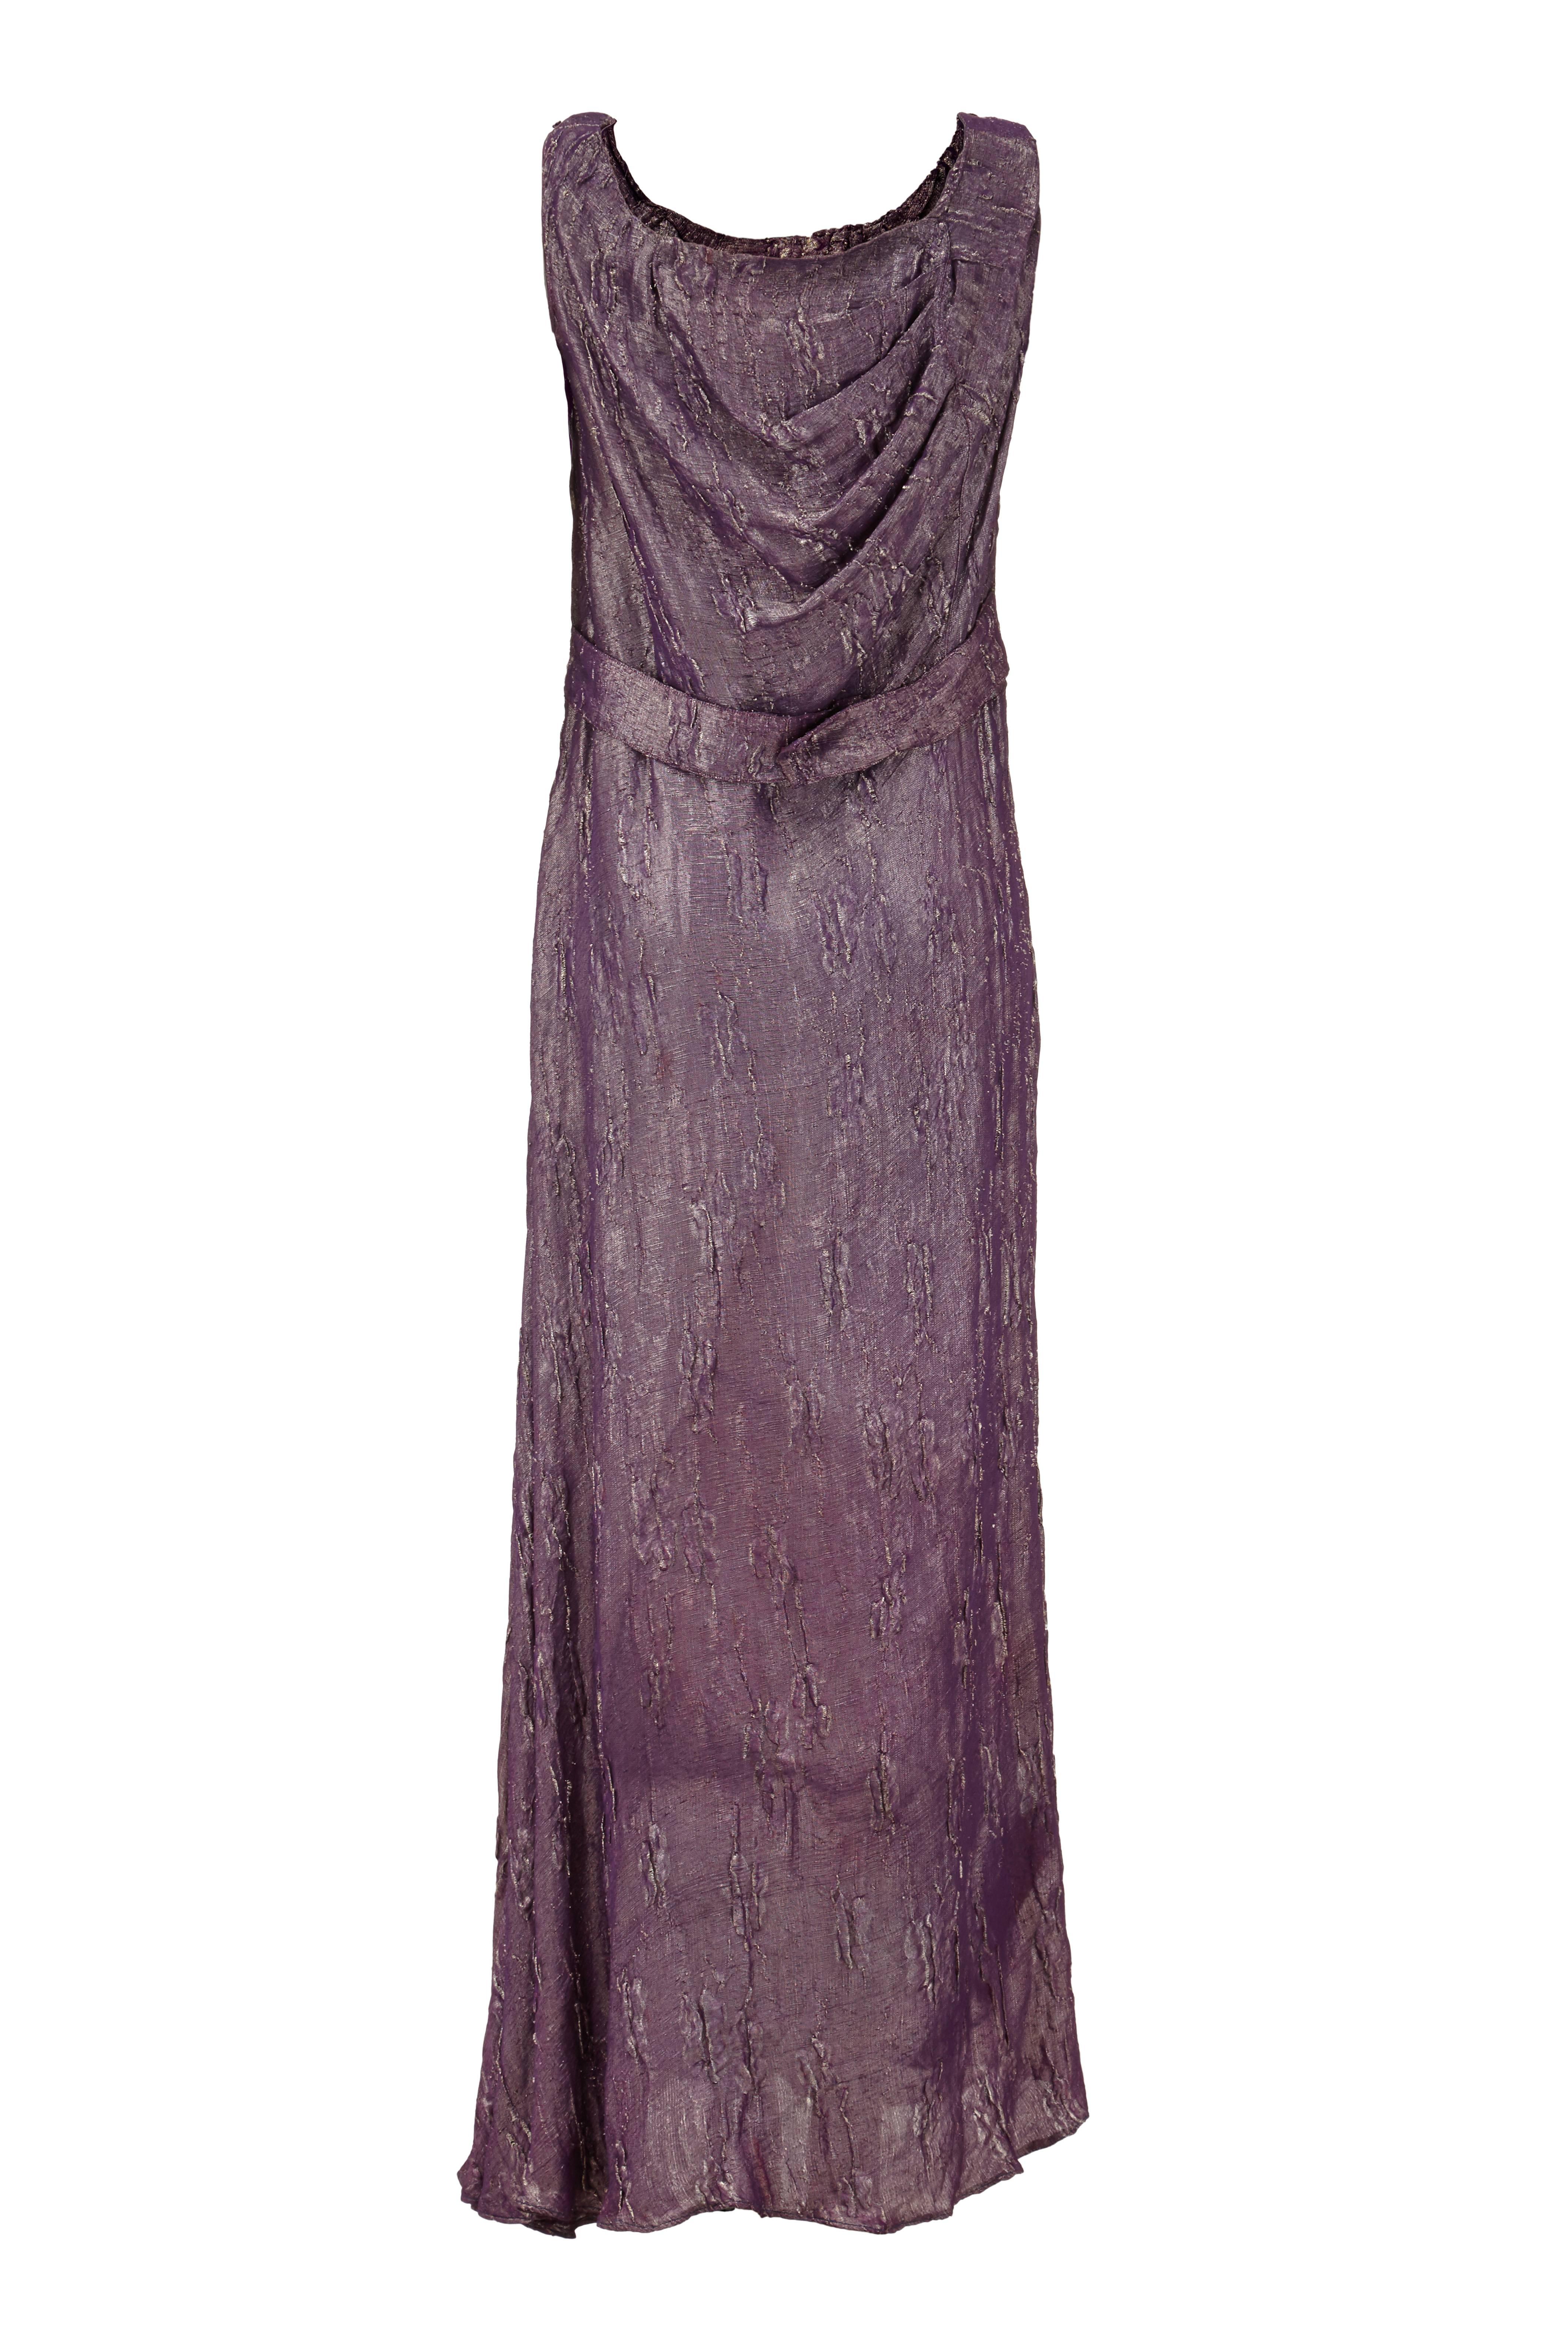 Amazing textured purple full-length vintage 1930s dress with gold lame threads throughout making this piece very striking and perfect for the party season. It has a scoop neckline and pretty draping and a half belt at the back. In very good vintage